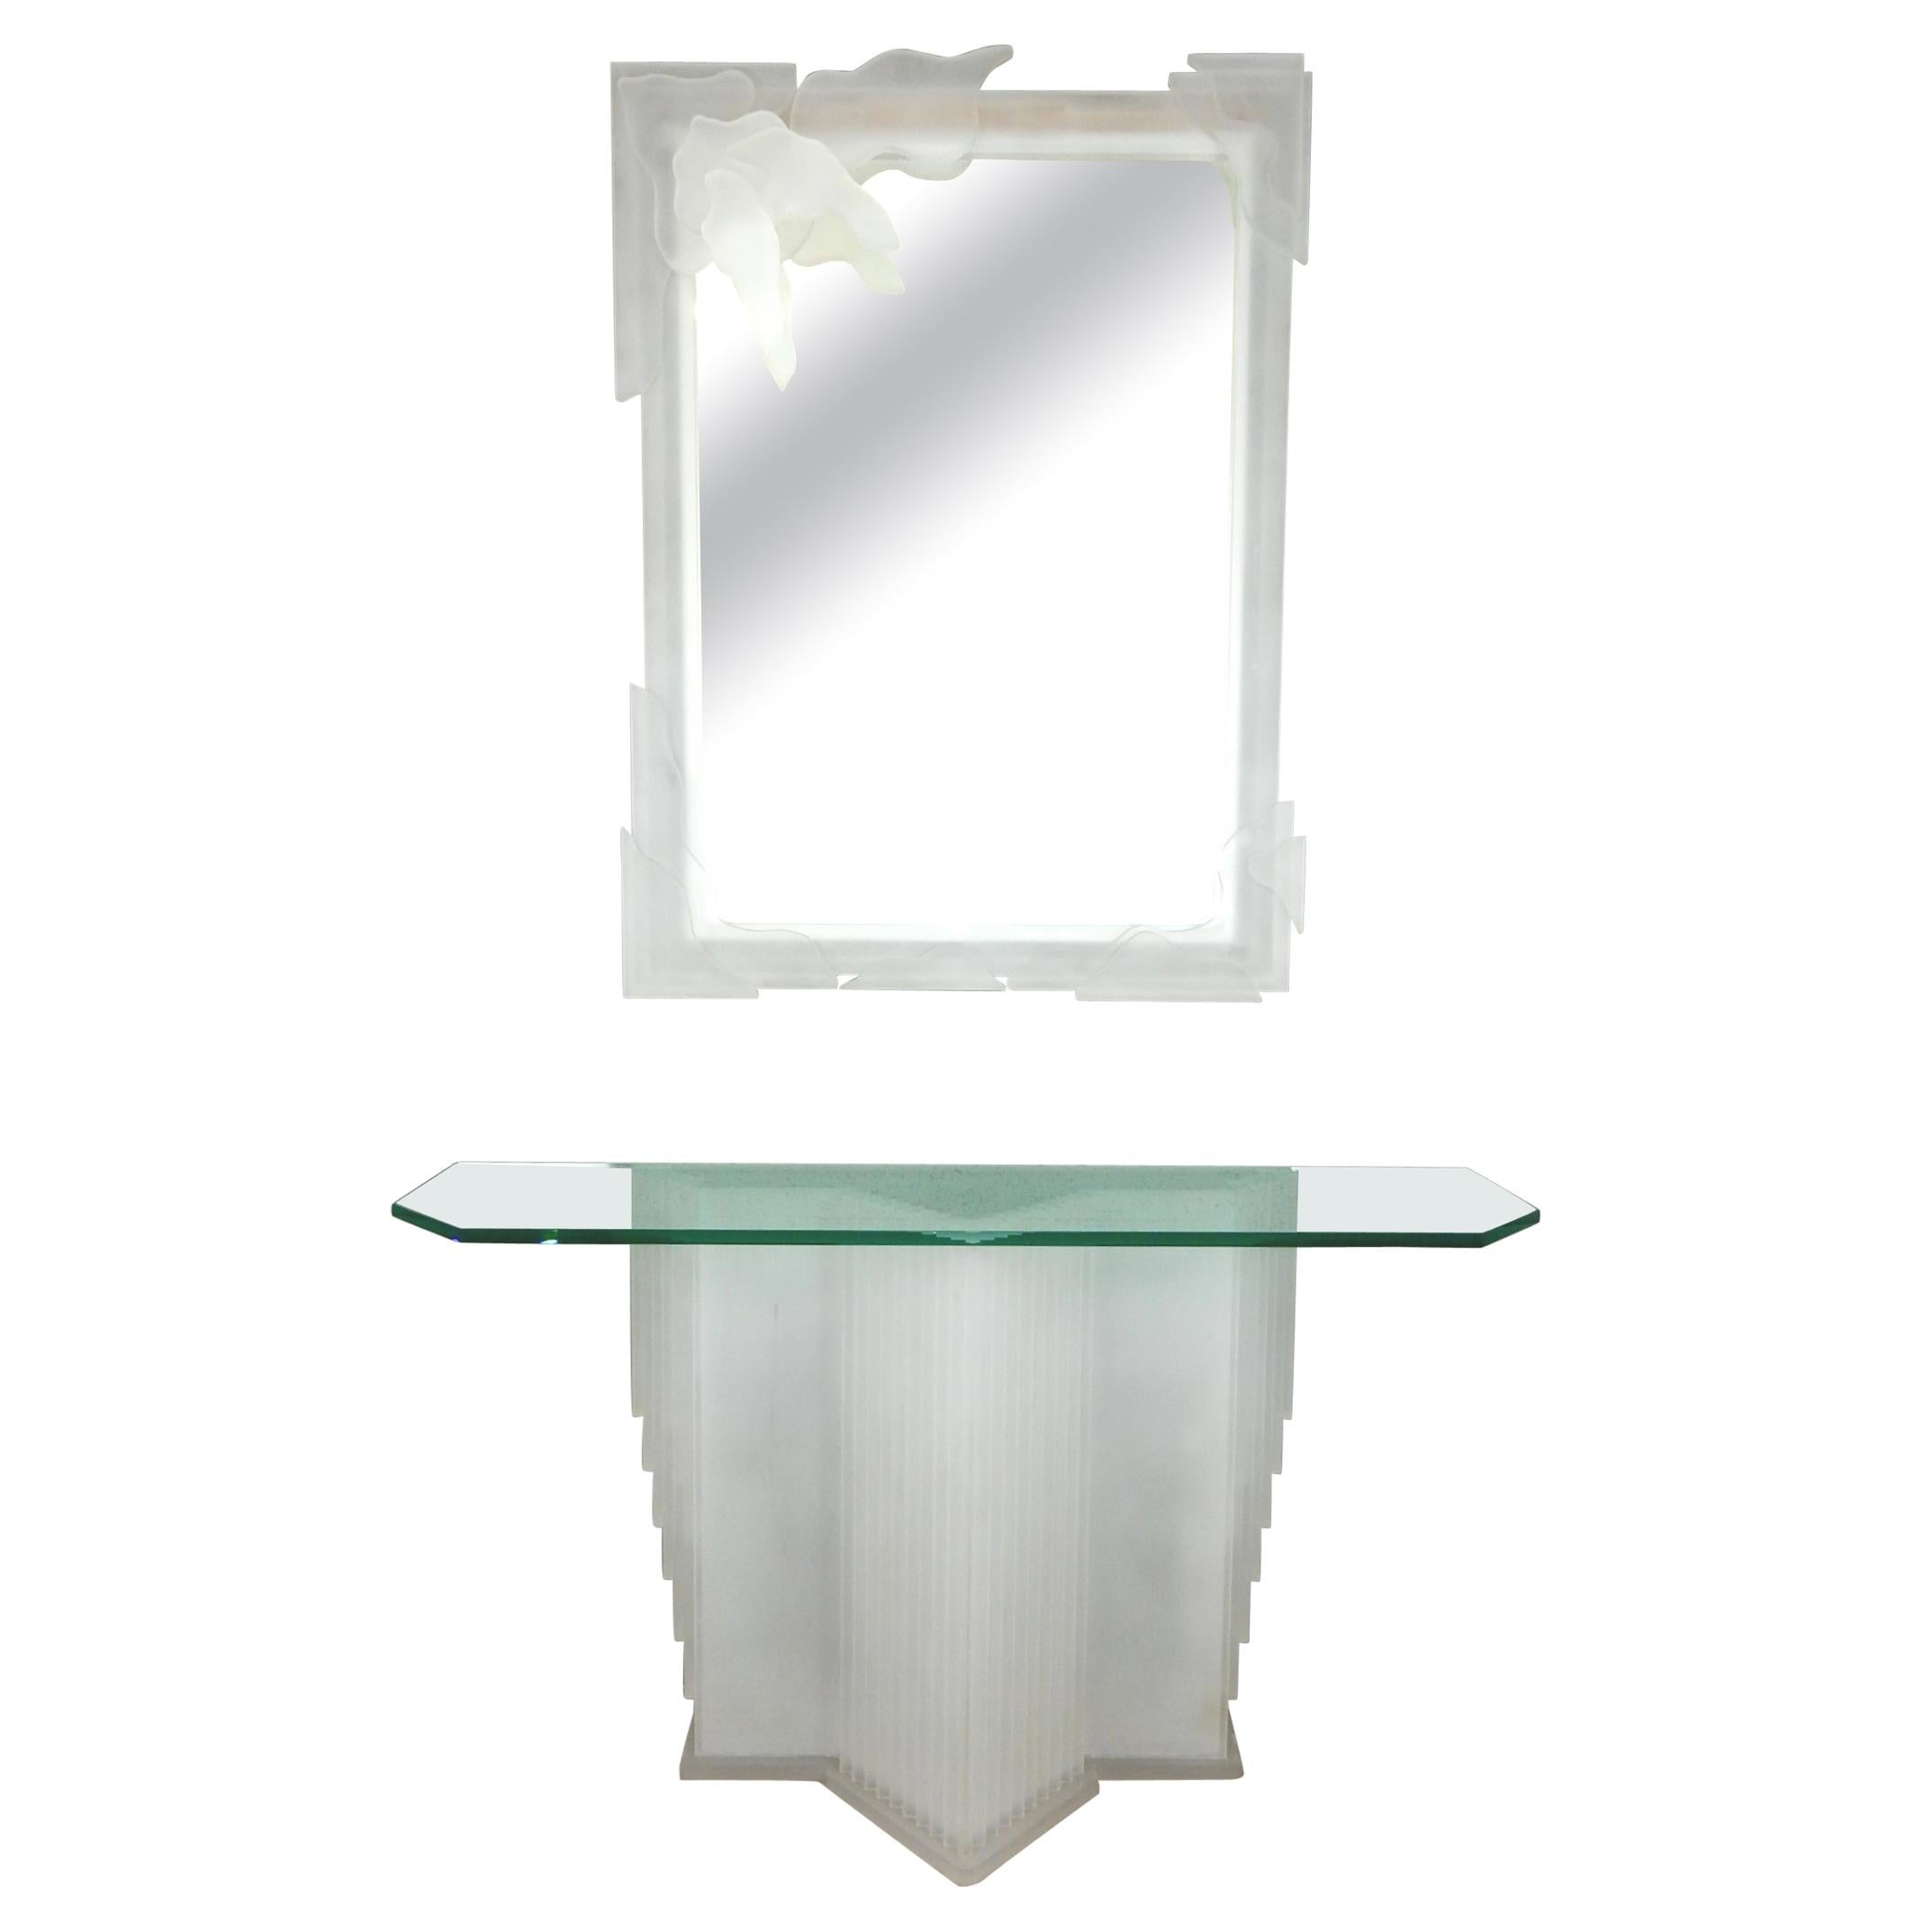 Art Deco Style Illuminated White Lucite Sculptured Wall Console Table and Mirror